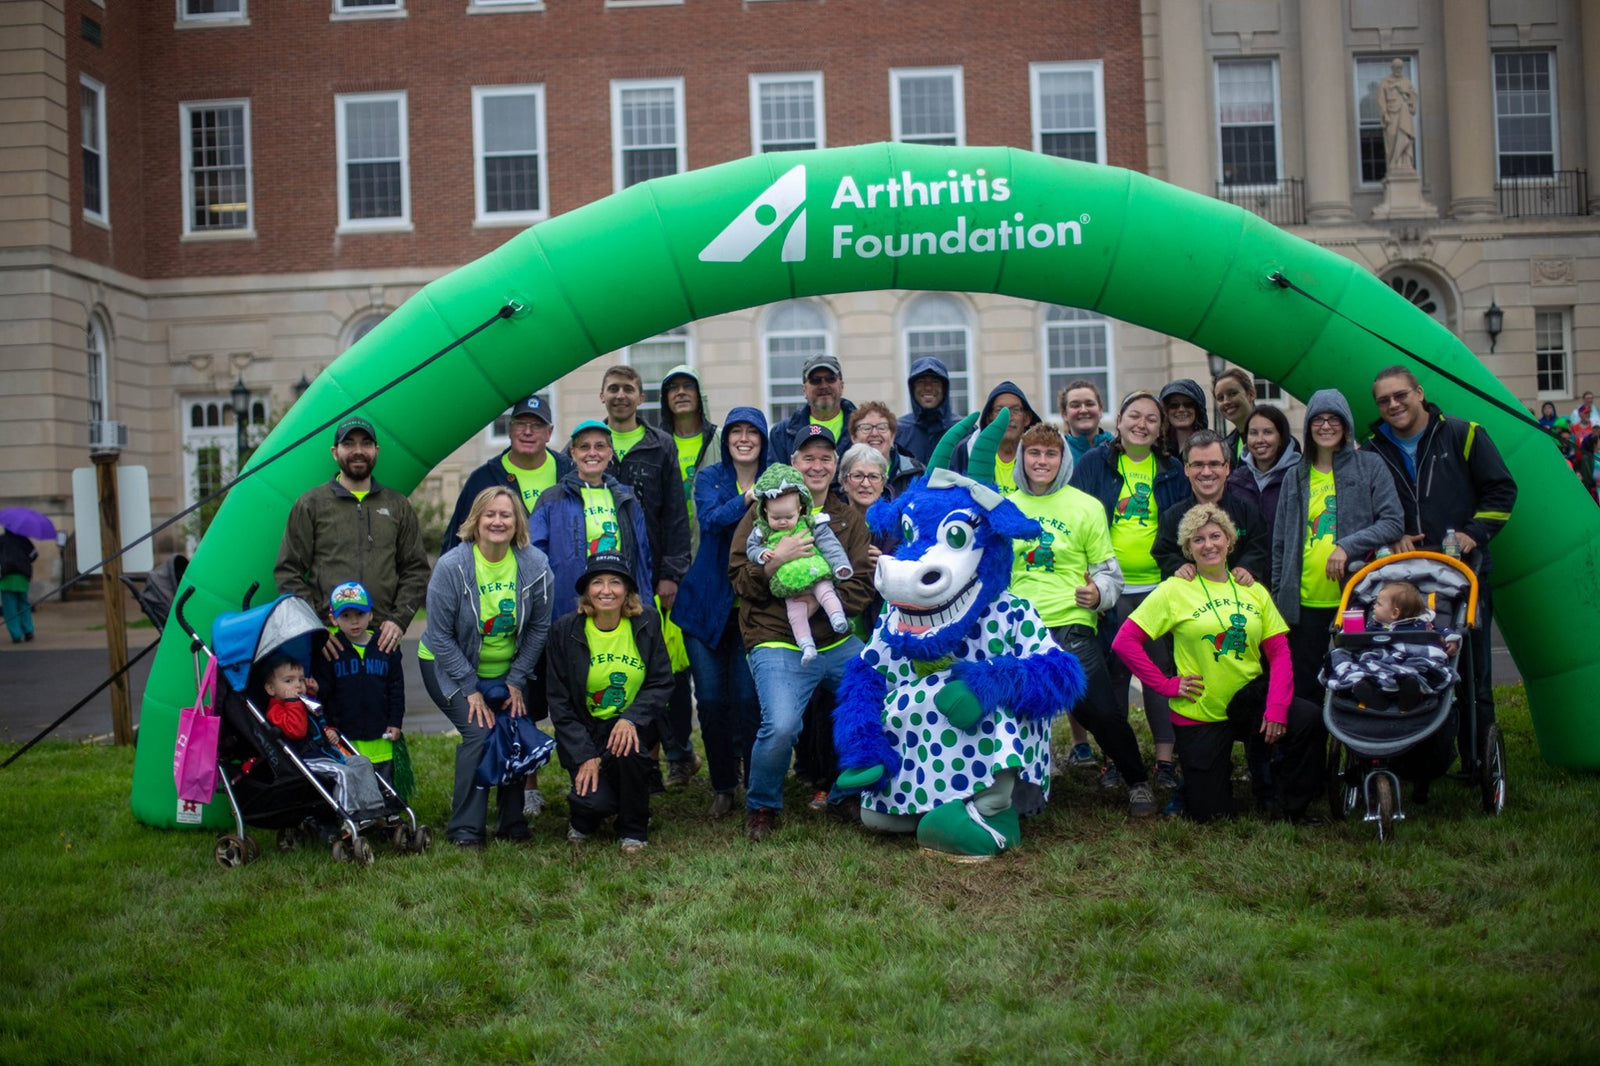 Group of participants and a mascot under a green Arthritis Foundation inflatable arch at a charity walk event.